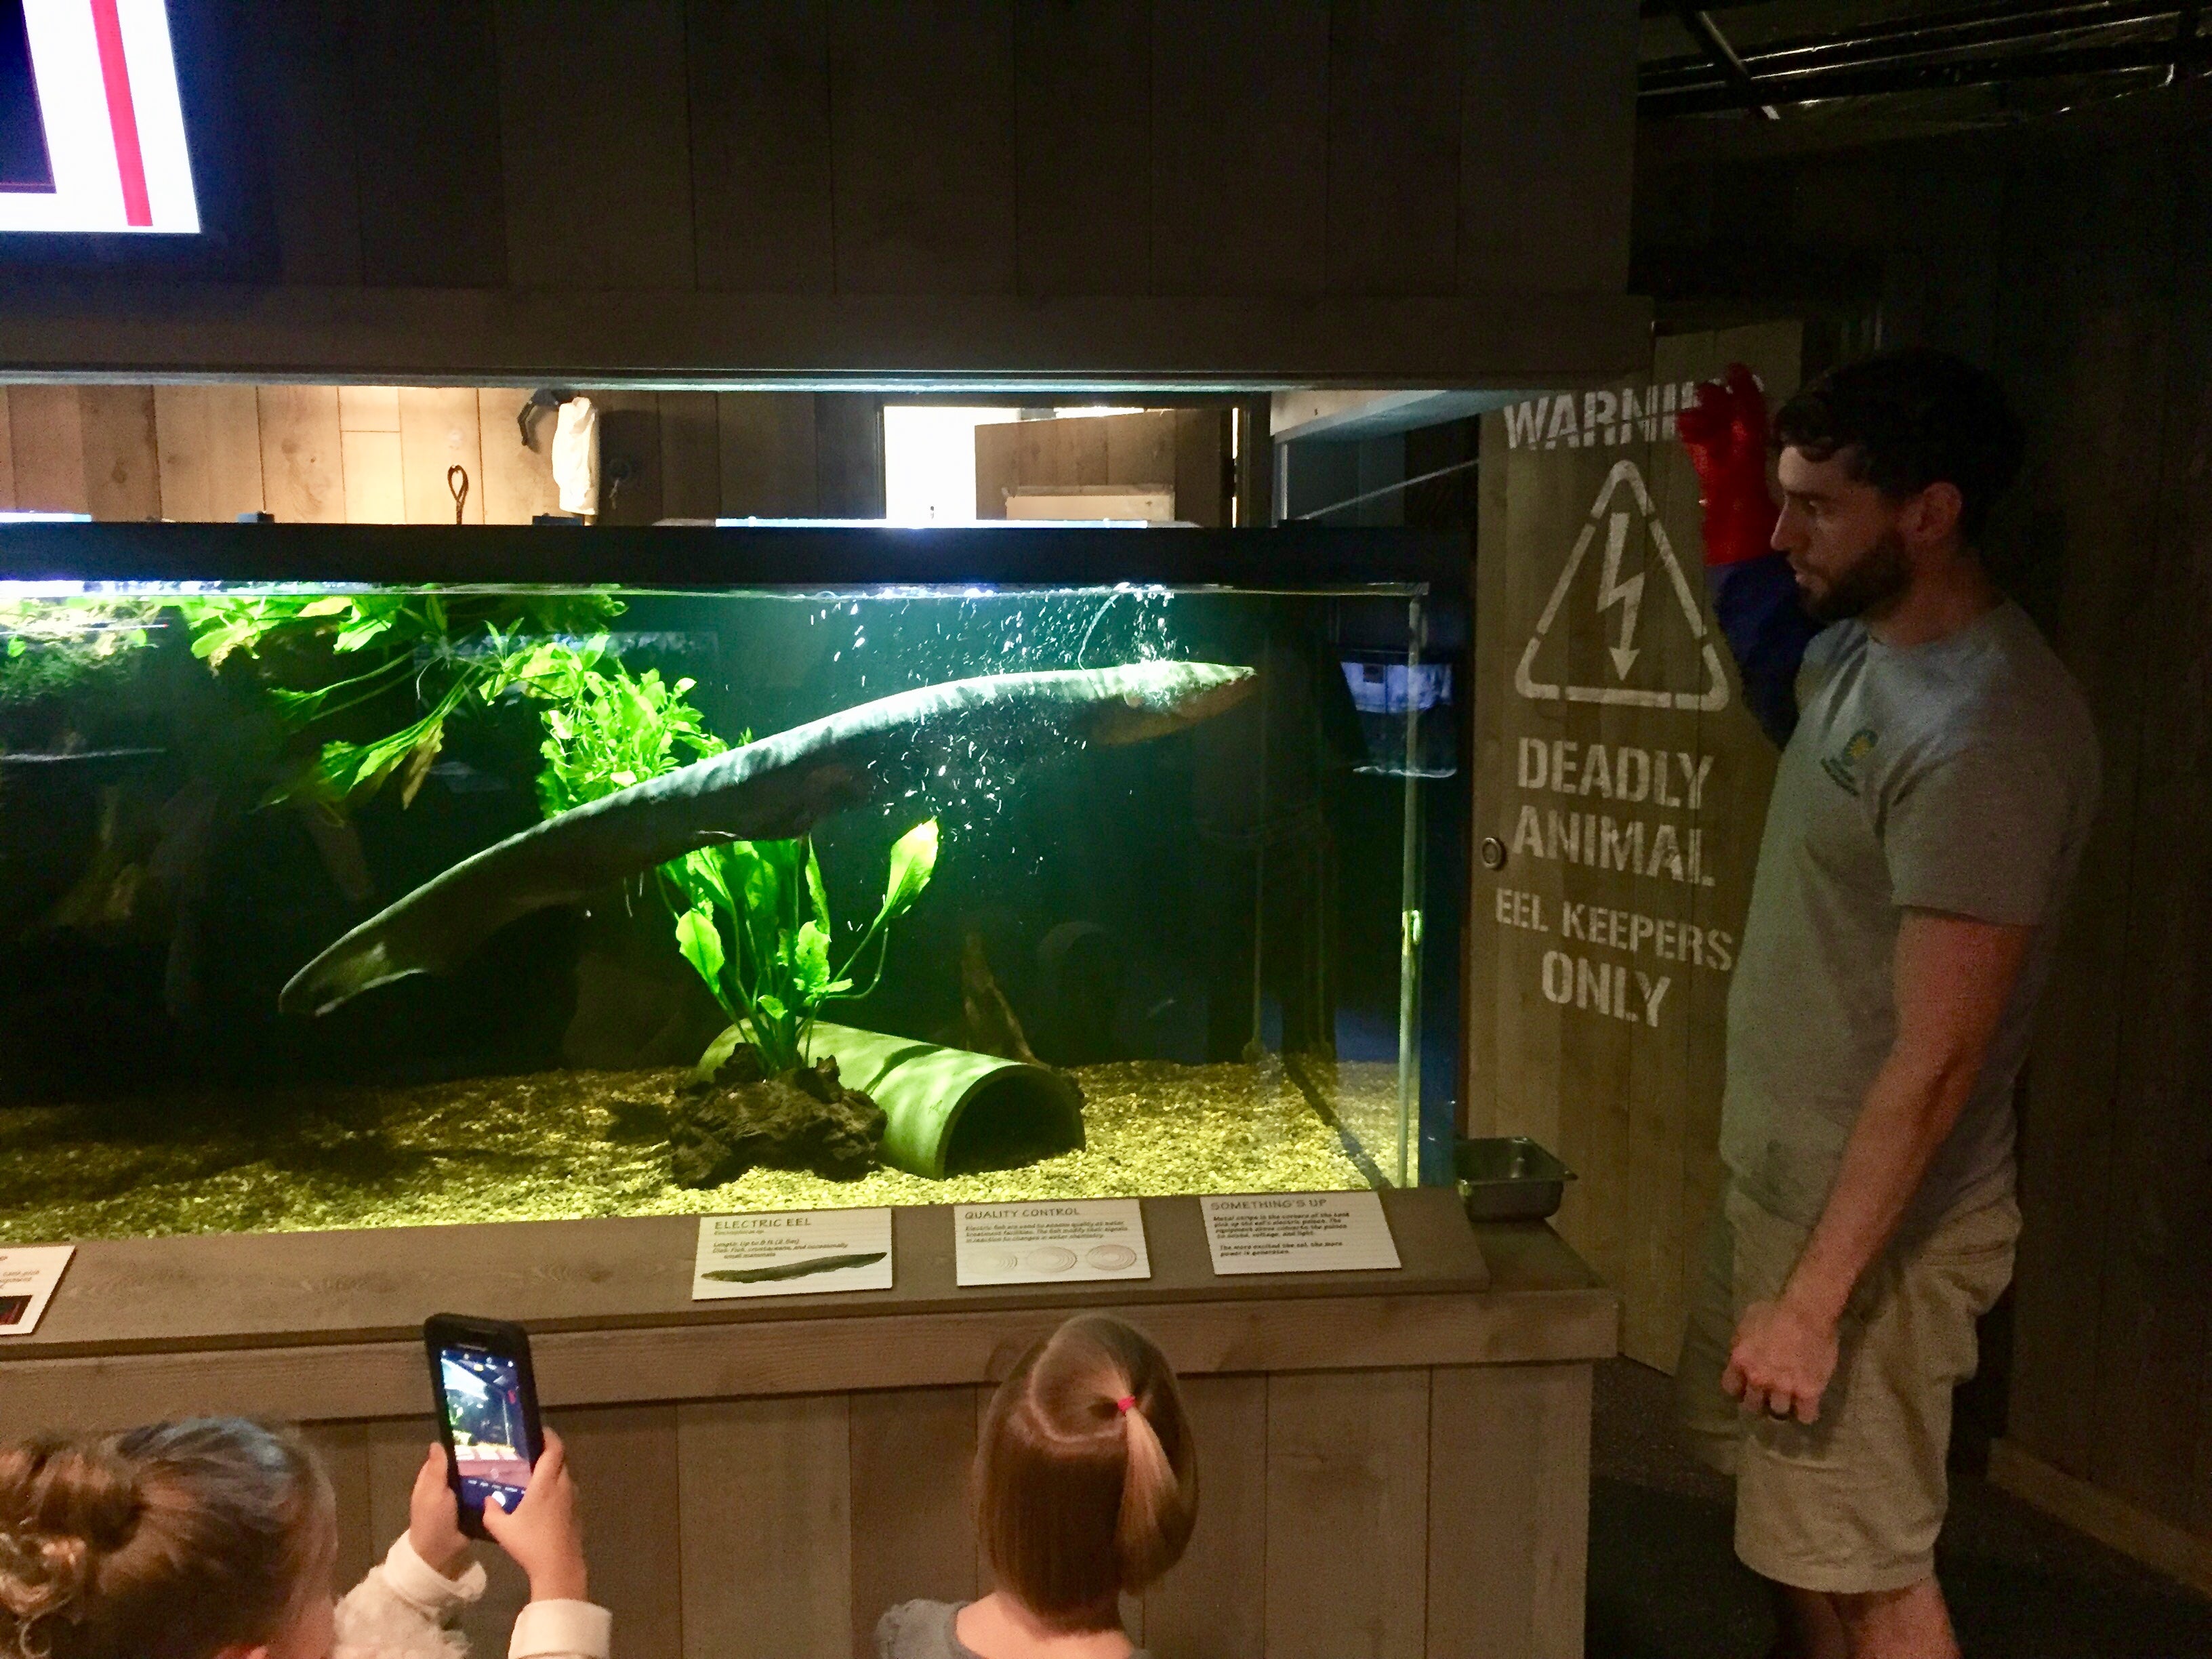 A zookeeper gives a public demonstration with the electric eel